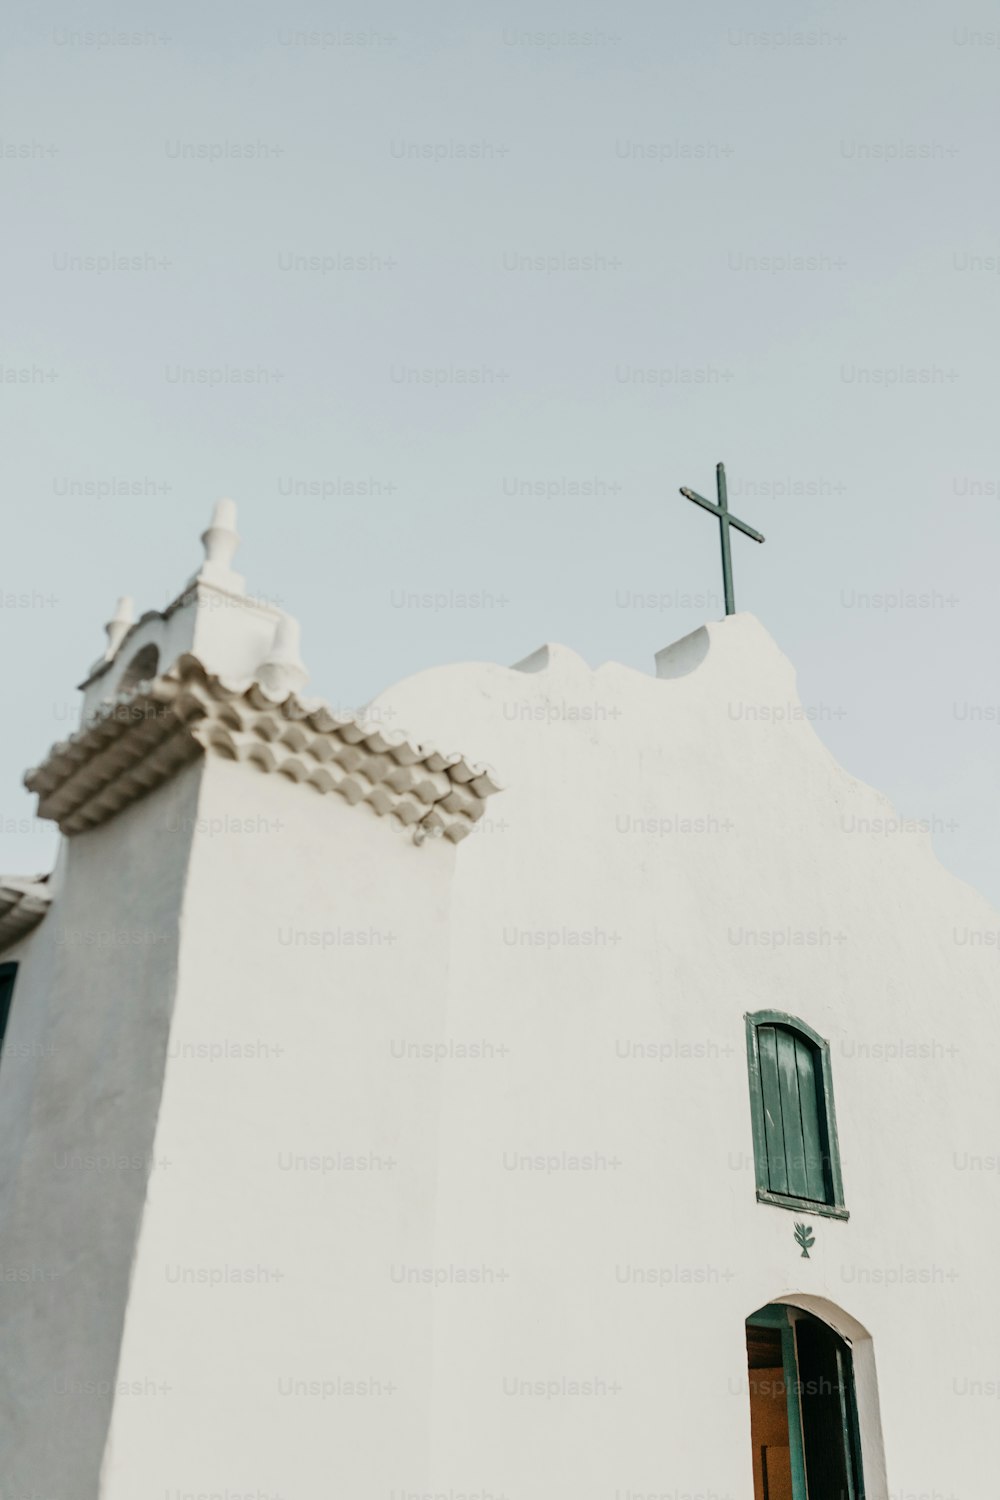 a white church with a cross on top of it